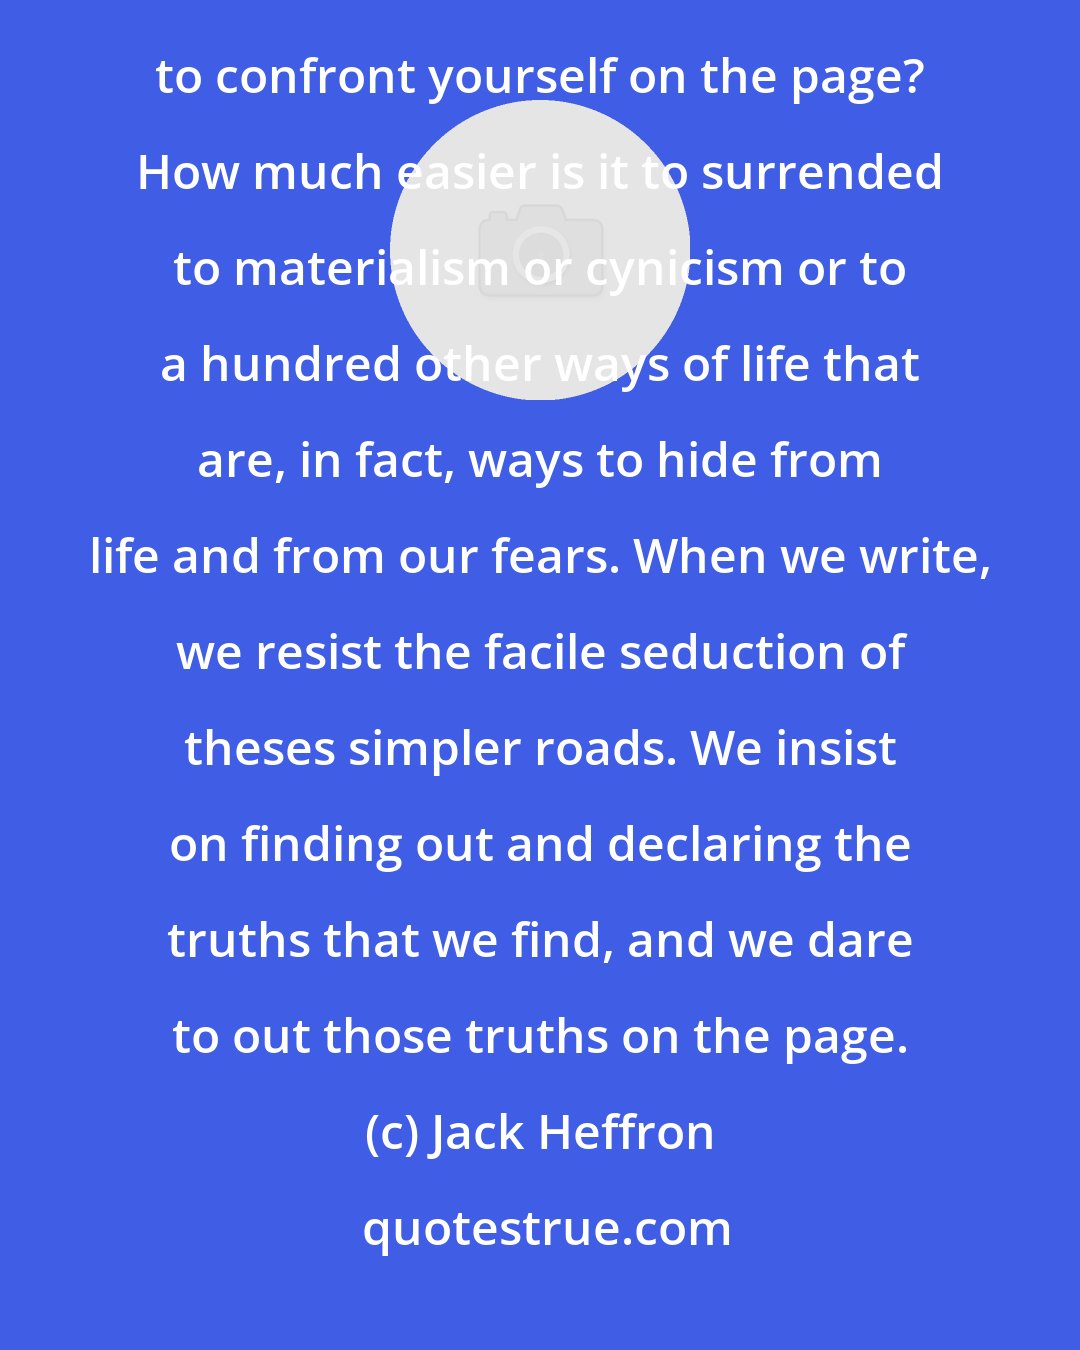 Jack Heffron: Writing, therefore, is also an act of courage. How much easier is it to lead an unexamined life than to confront yourself on the page? How much easier is it to surrended to materialism or cynicism or to a hundred other ways of life that are, in fact, ways to hide from life and from our fears. When we write, we resist the facile seduction of theses simpler roads. We insist on finding out and declaring the truths that we find, and we dare to out those truths on the page.